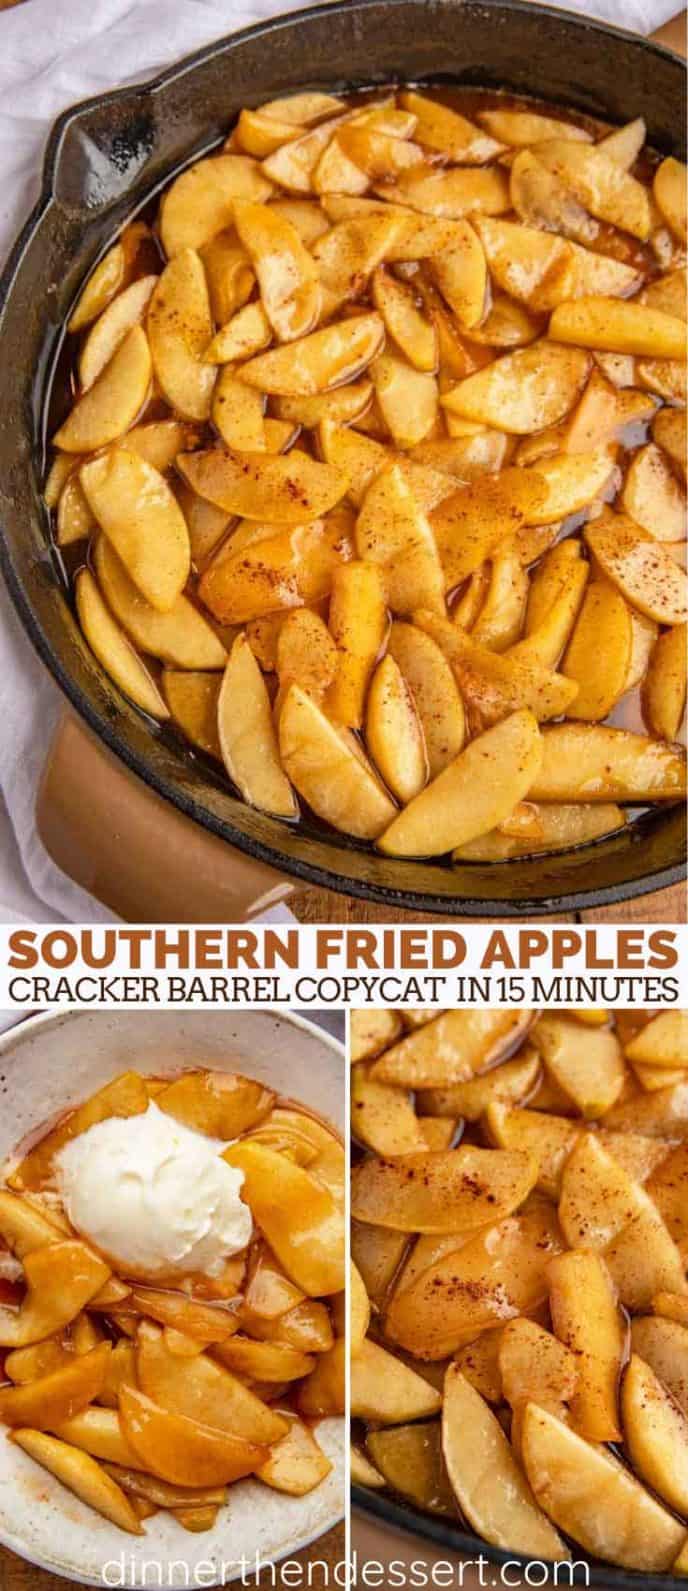 Southern Fried Apples ready to serve